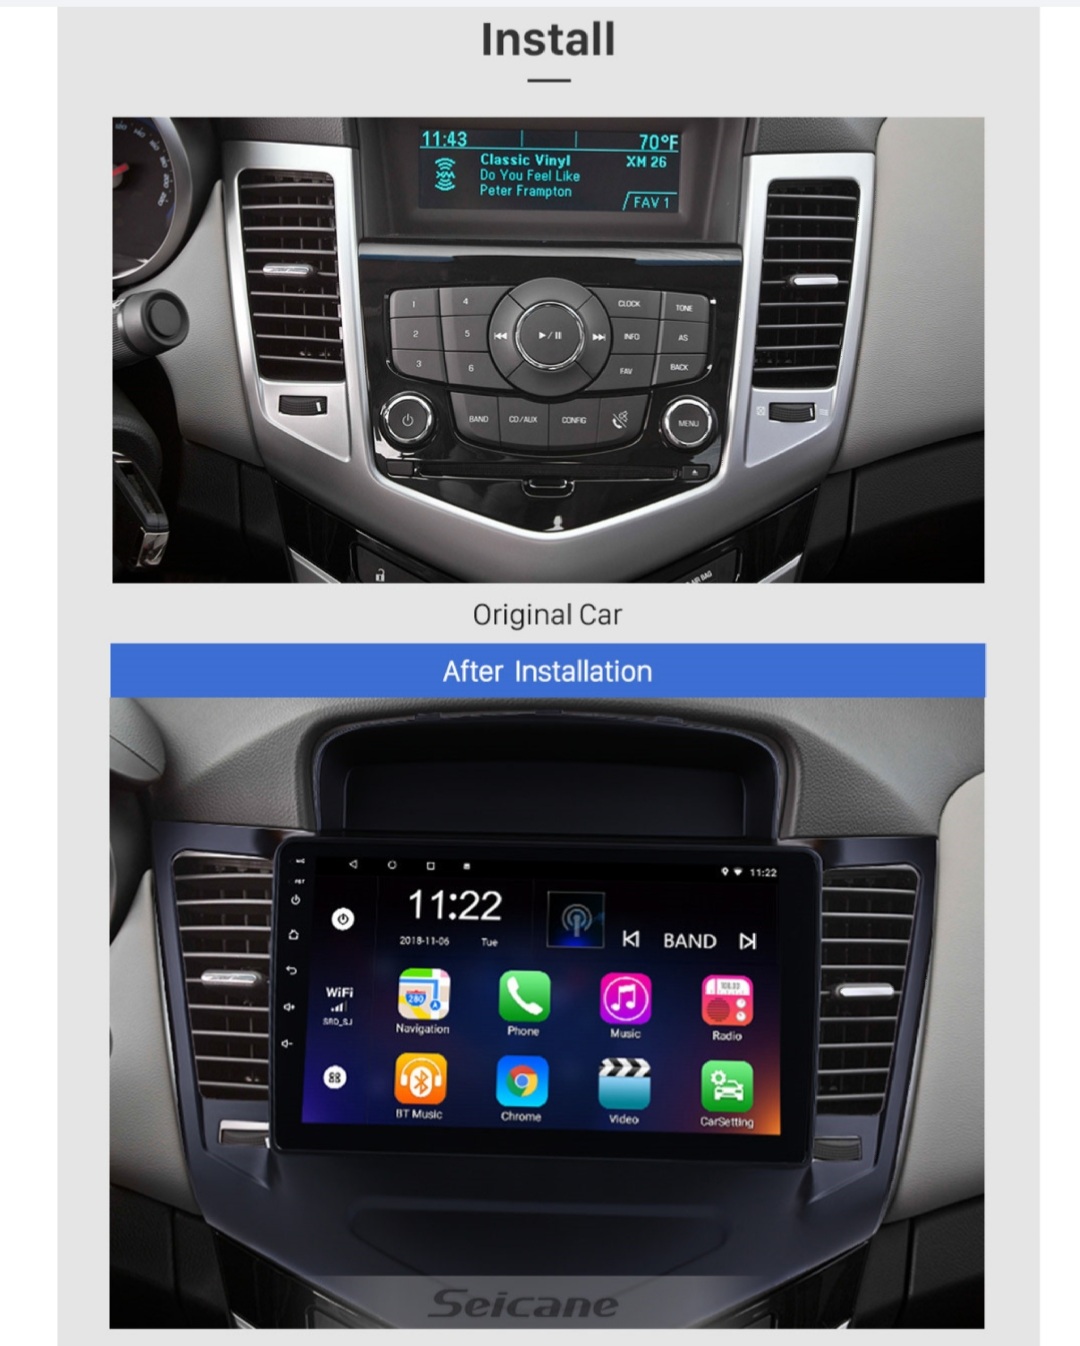 9"android 11 bilstereo Chevrolet Cruze (2013--2015) gps wifi carplay android auto blåtand rds Dsp 32gb 4G SIM